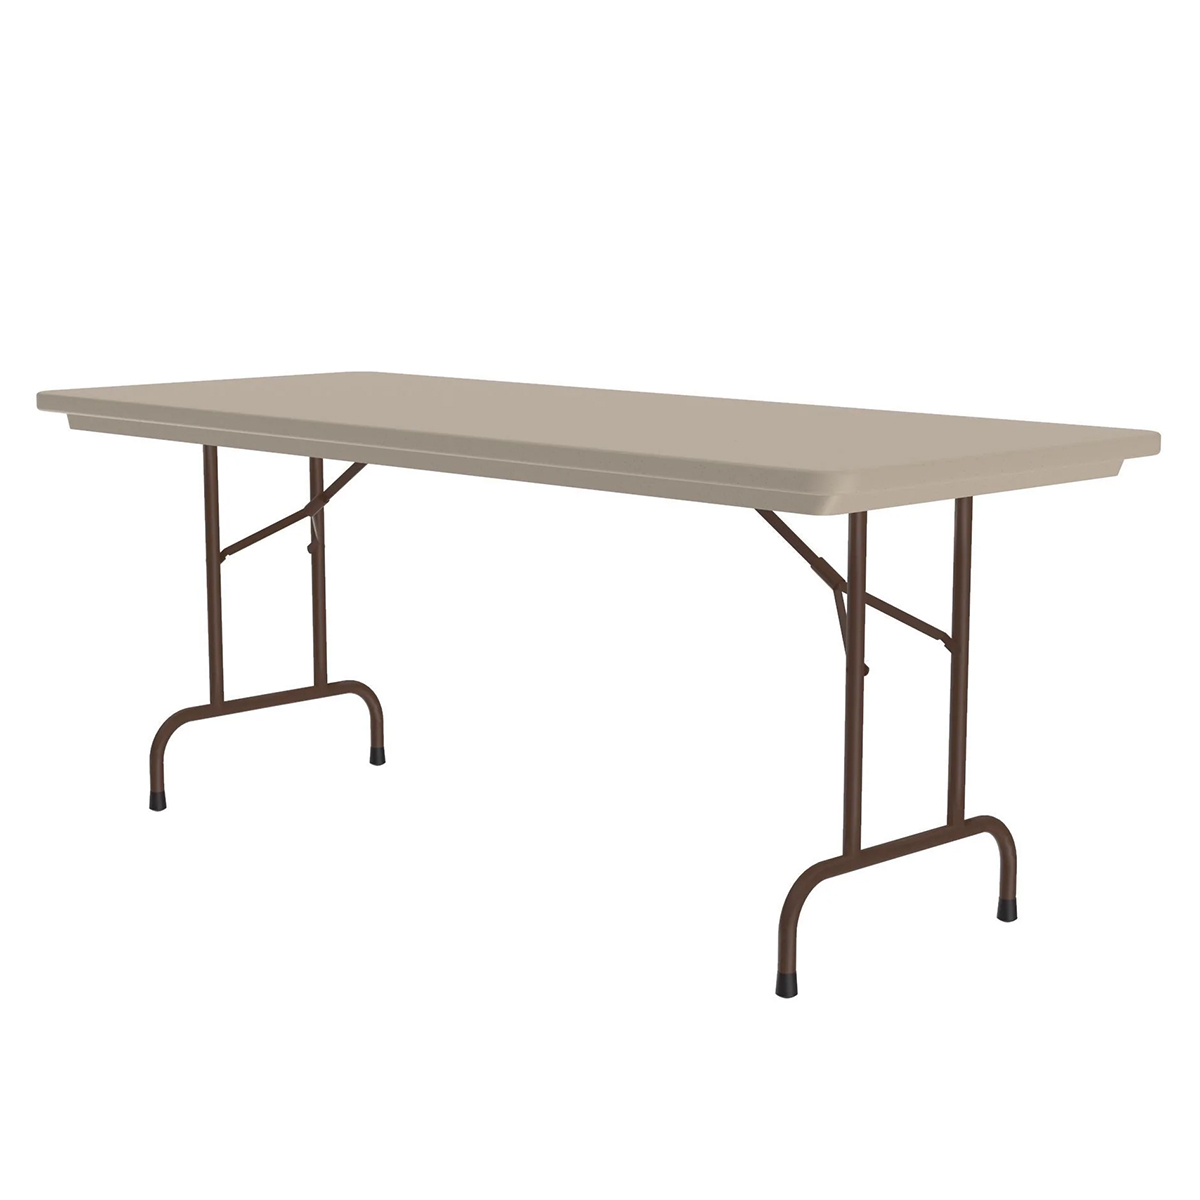 Correll 30″x72″ Commercial Blow-Molded Folding Table, Mocha Granite